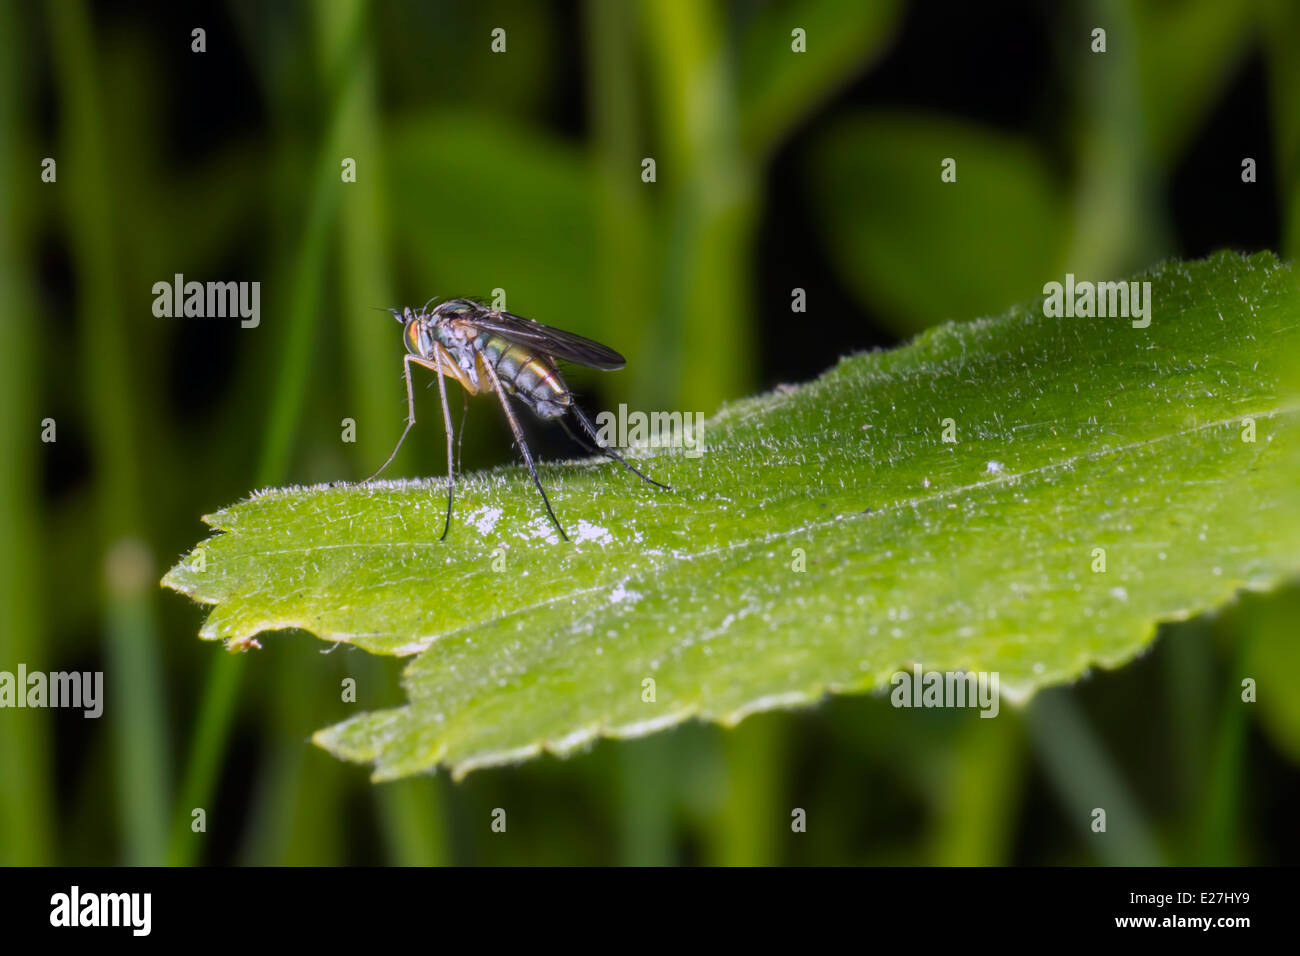 Portrait of a forest fly Stock Photo